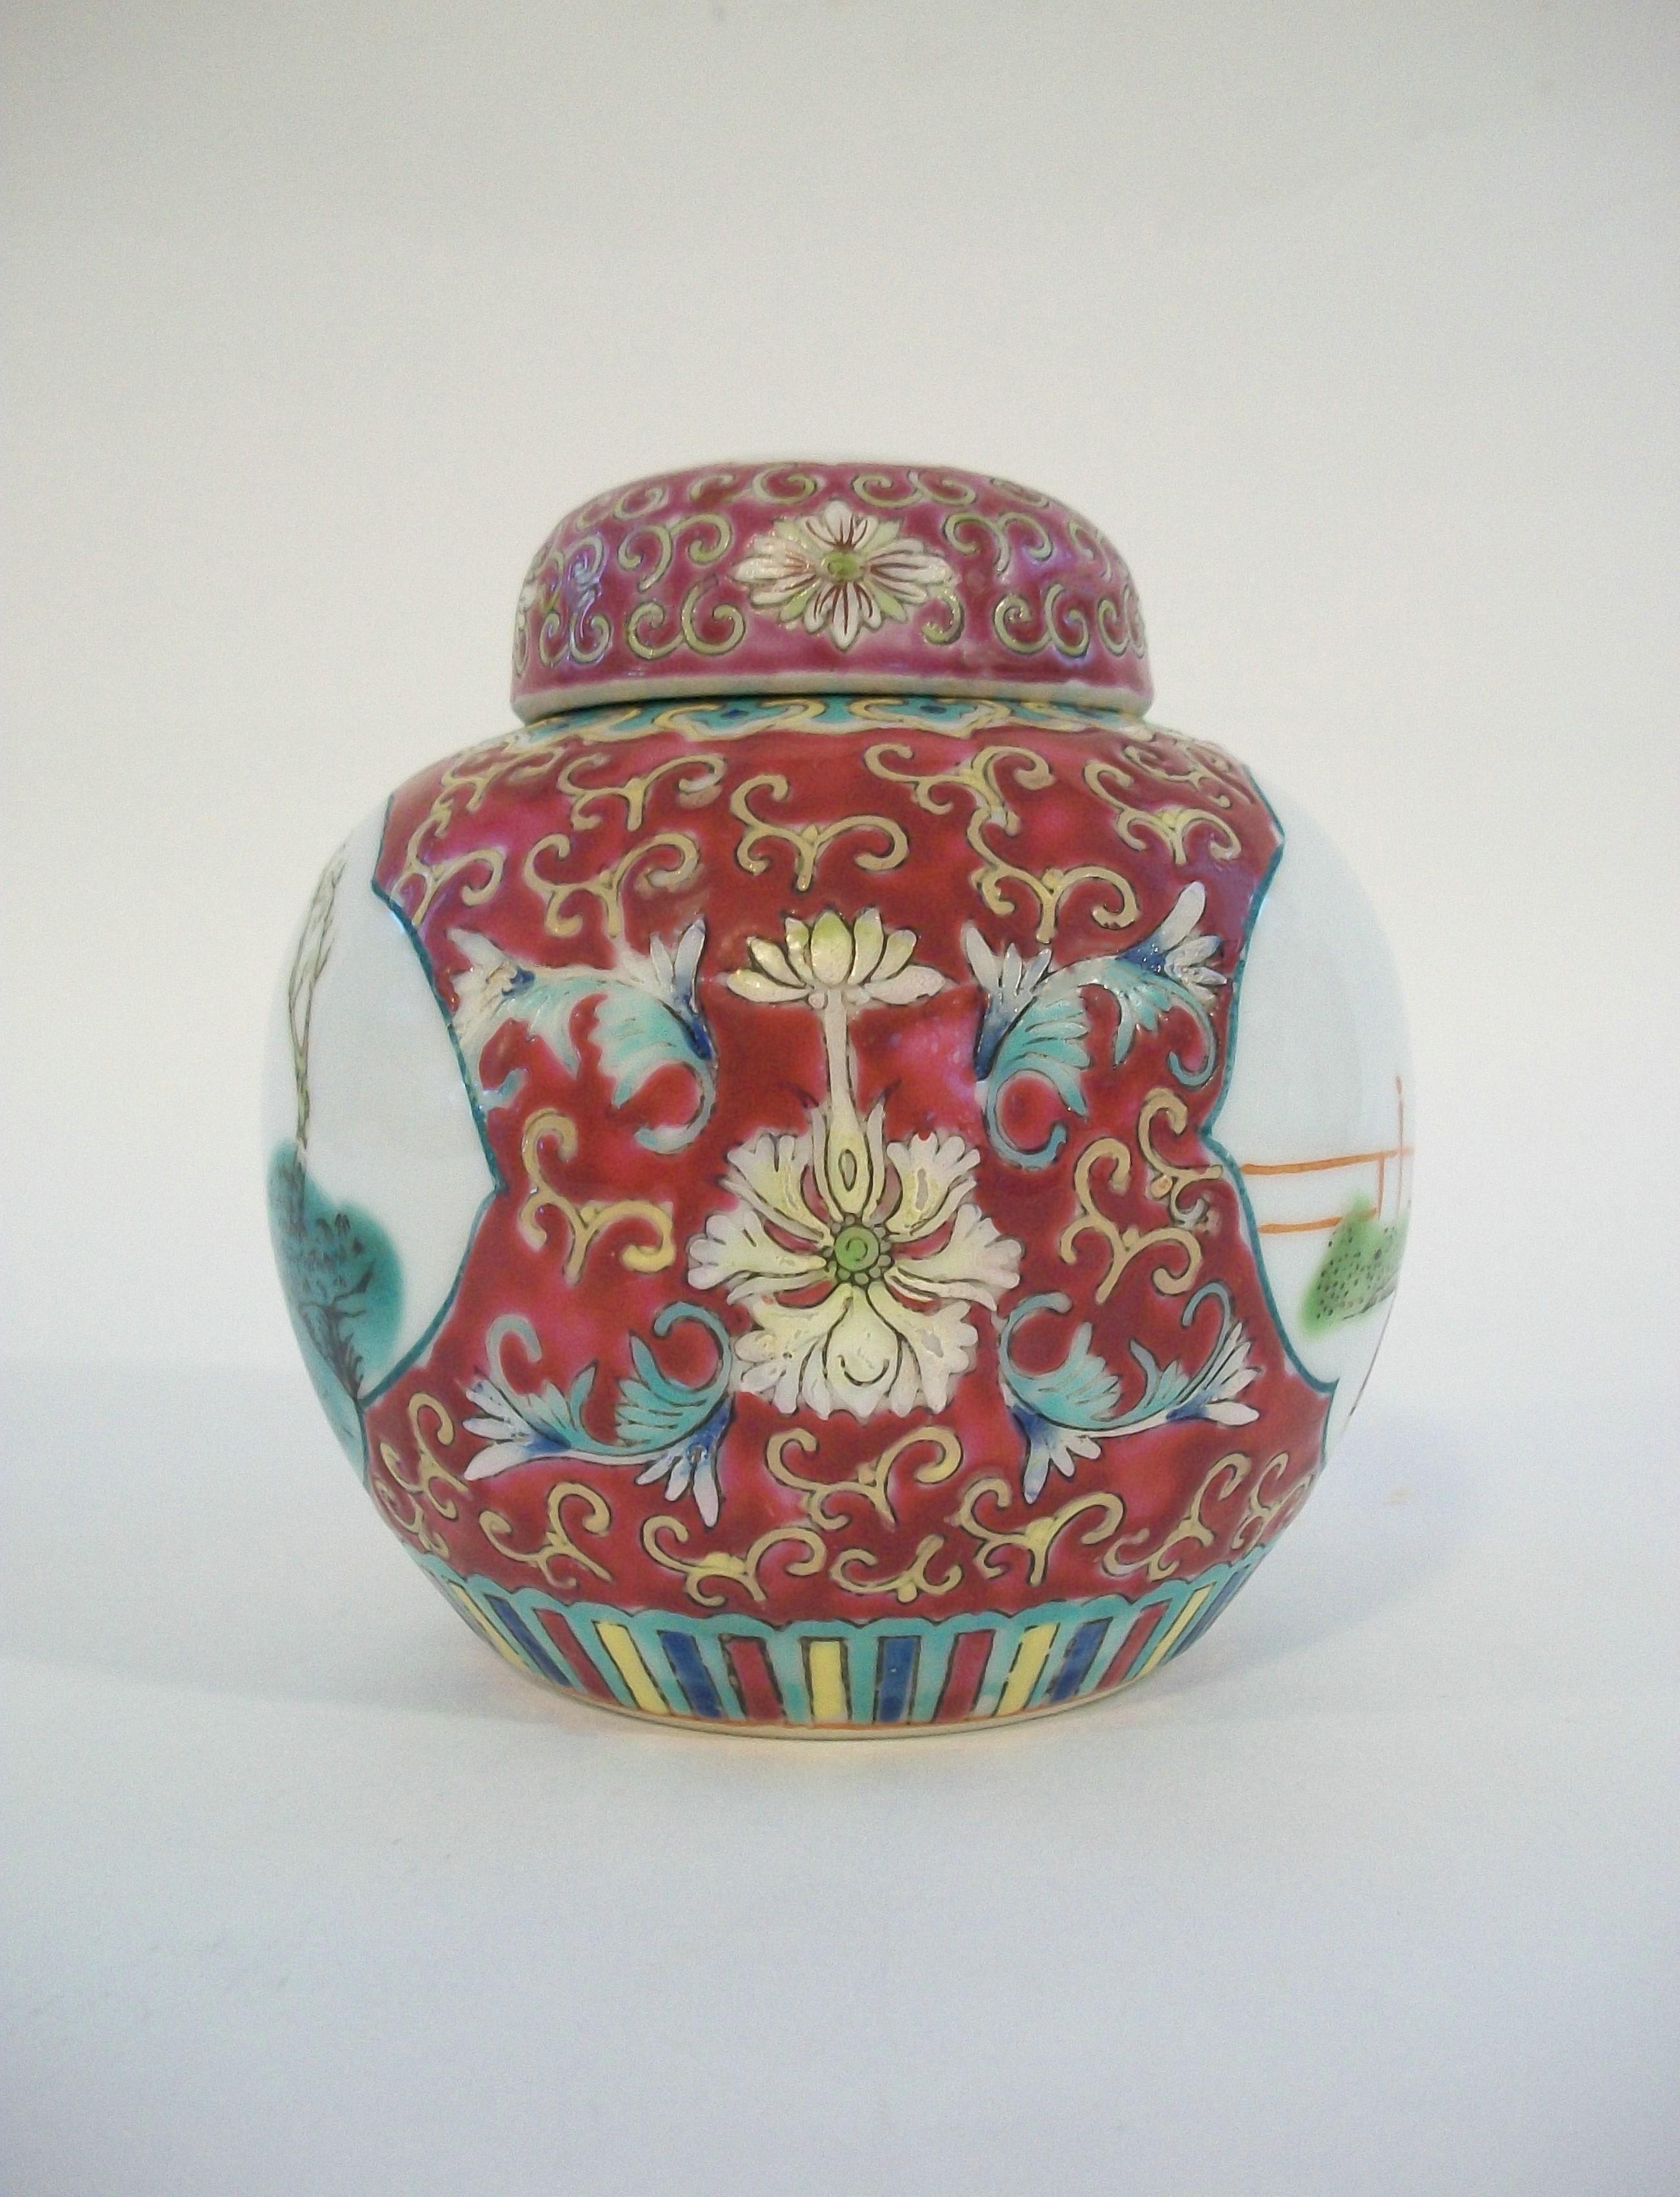 Hand-Painted Vintage Hand Painted Famille Rose Porcelain Ginger Jar - China - Mid 20th C. For Sale